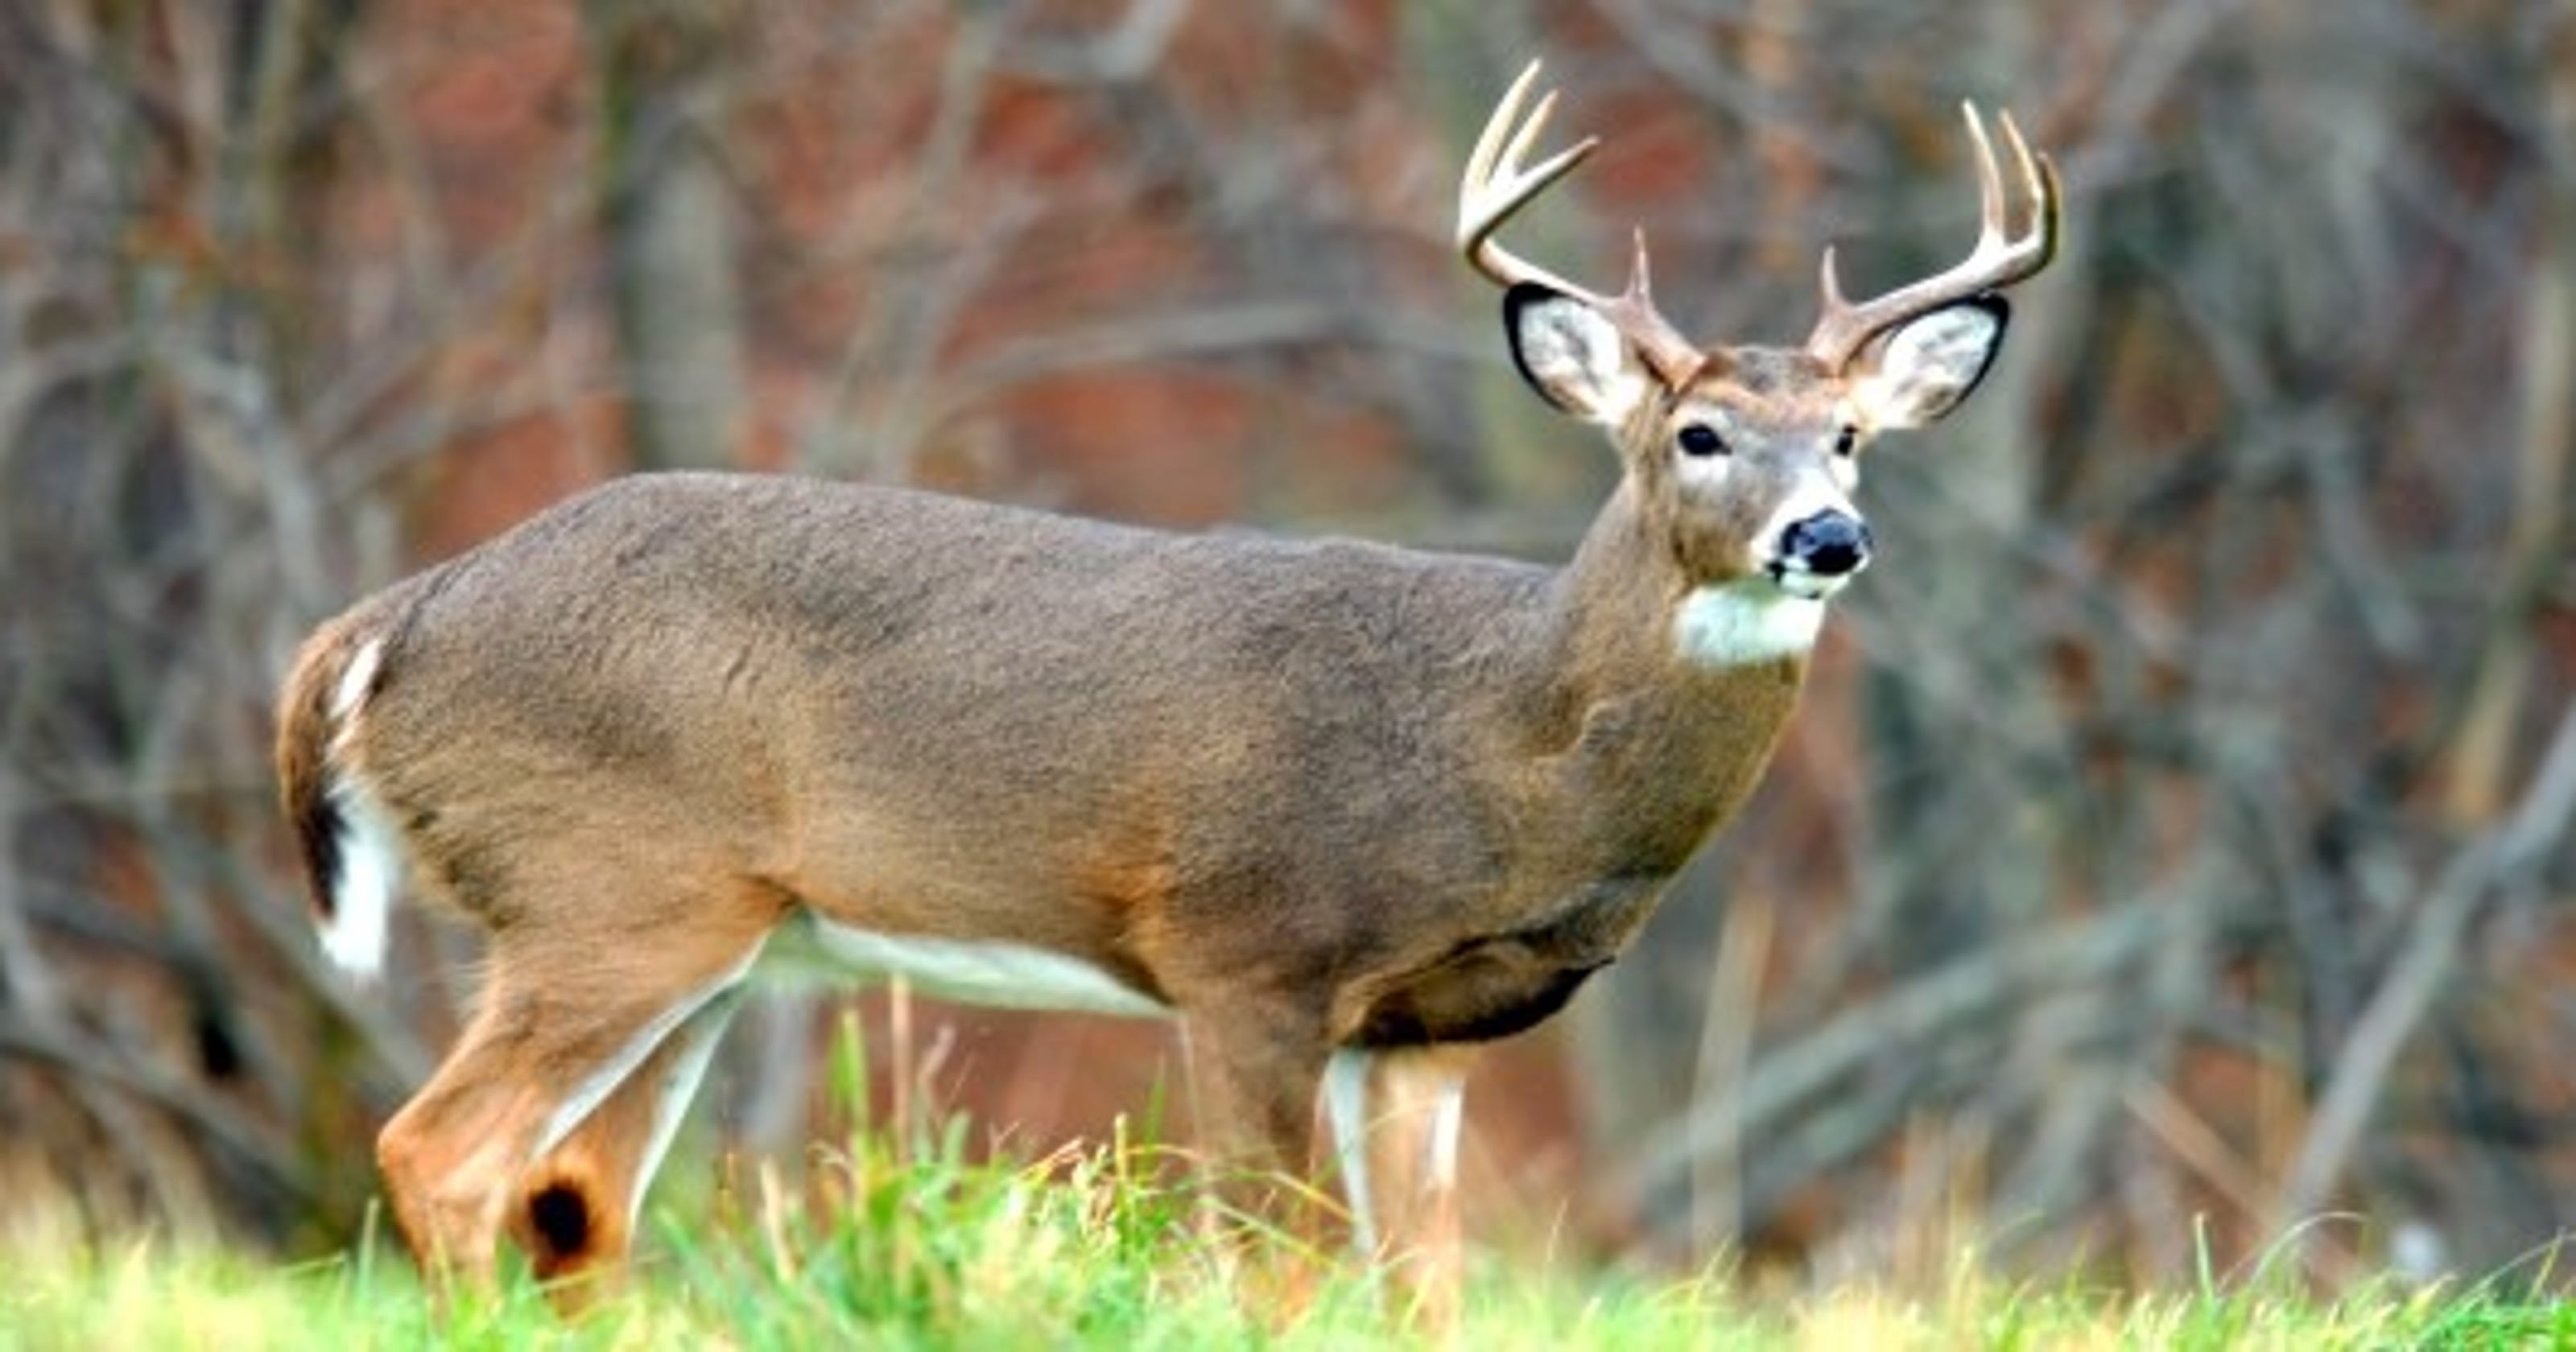 Pa. Game Commission urges hunters to thin the deer herd in some areas